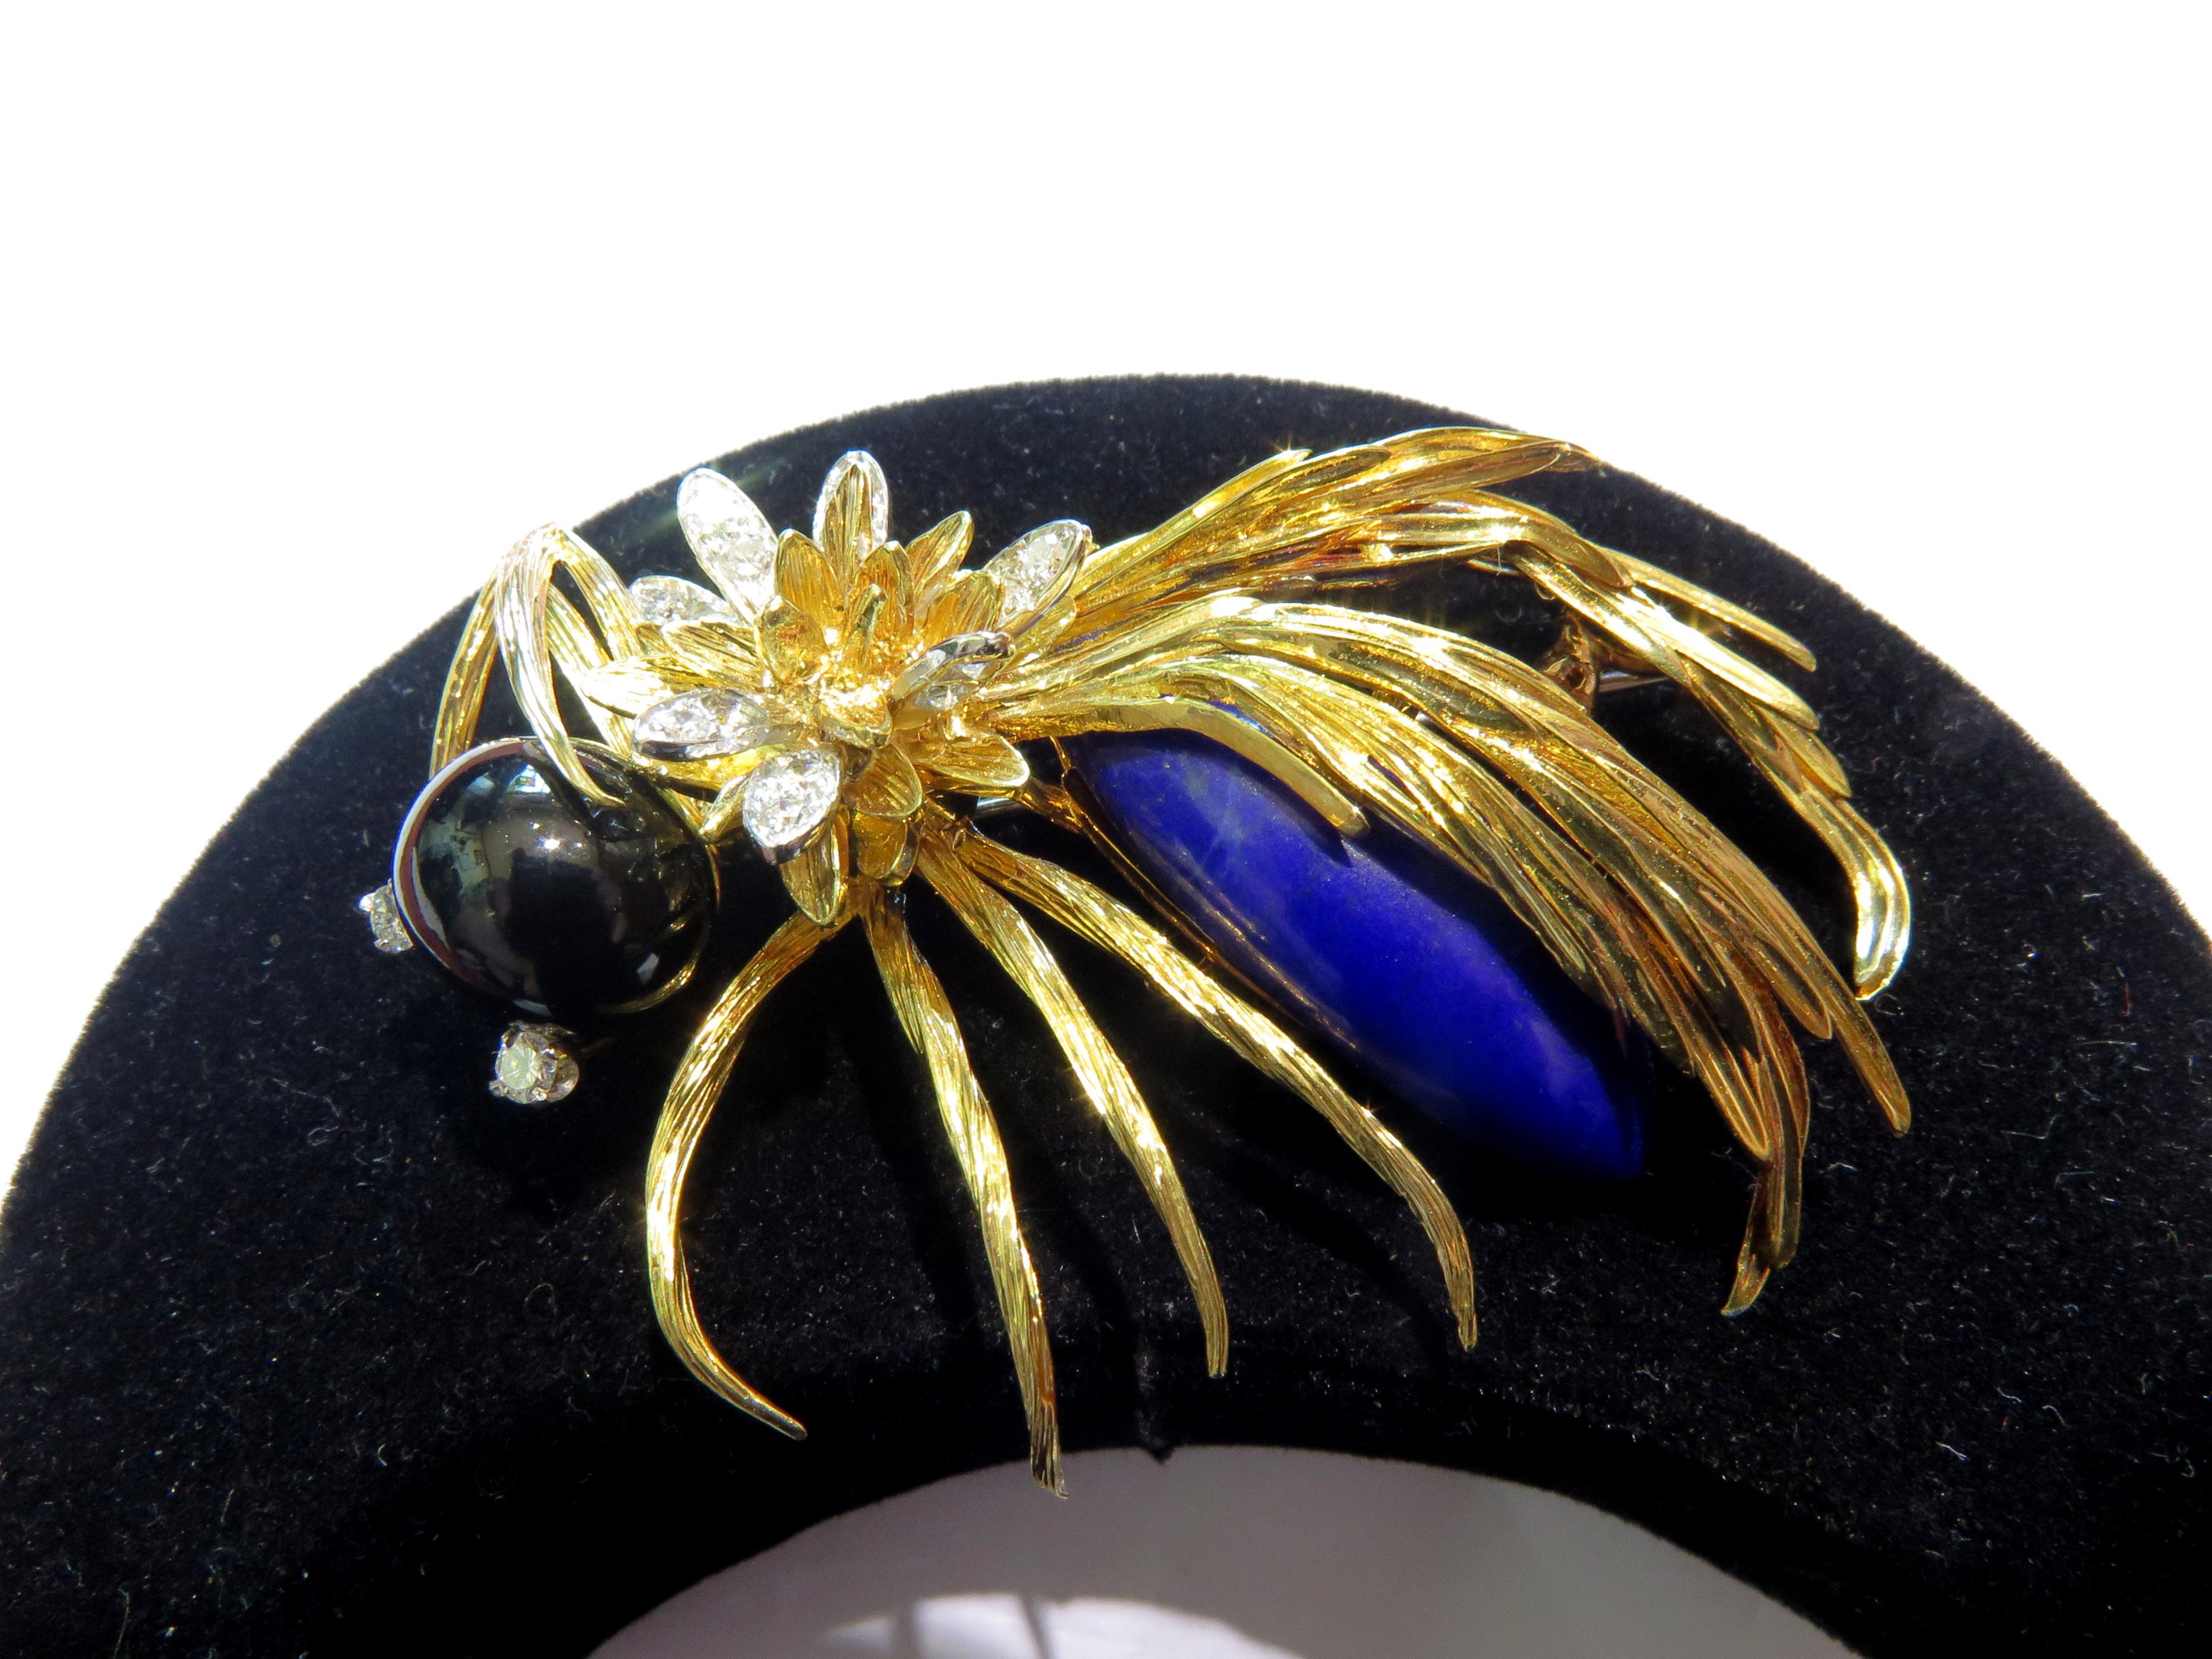 Huge Hammerman Brothers Platinum Gold Wasp Pin Brooch With Diamonds Lapis & Onyx For Sale 4